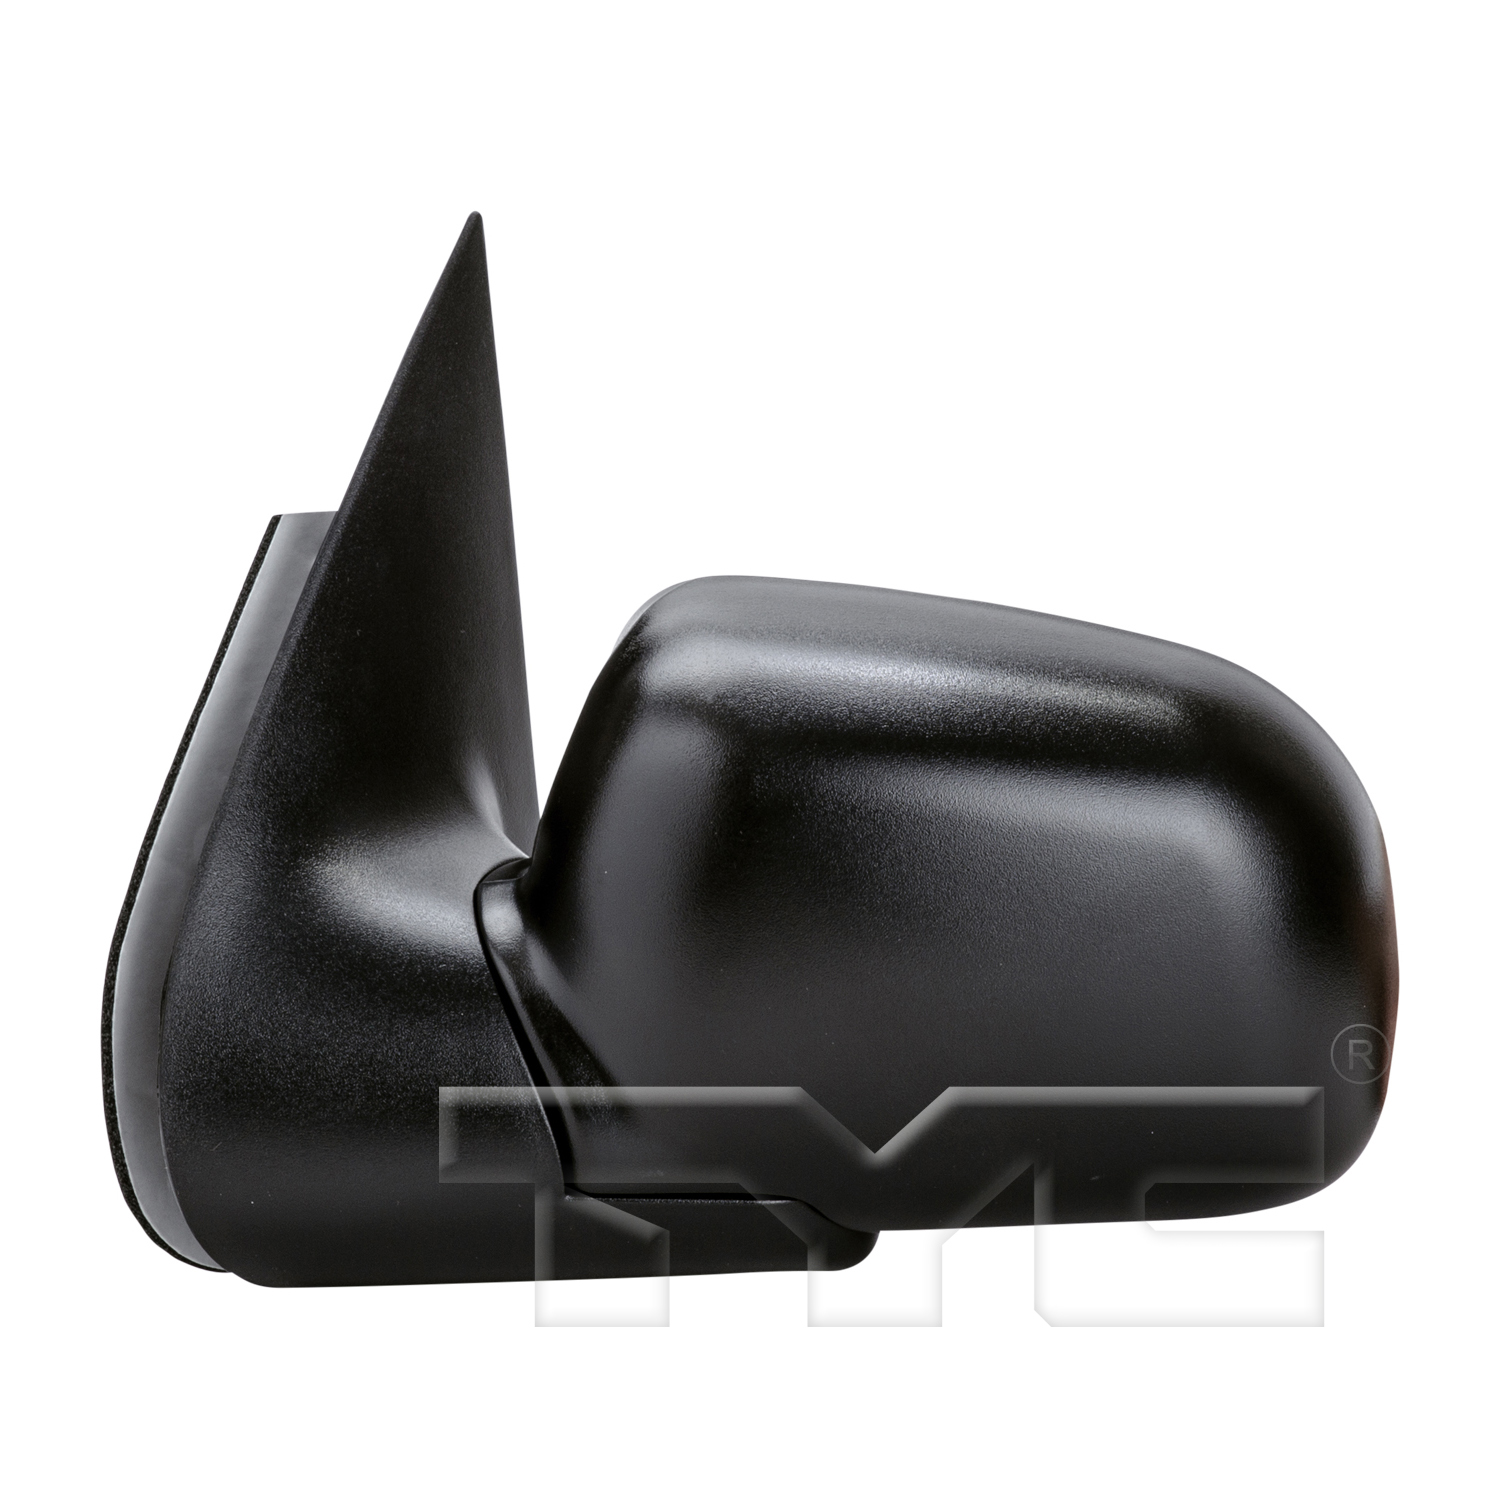 Aftermarket MIRRORS for FORD - EXPLORER, EXPLORER,02-05,LT Mirror outside rear view